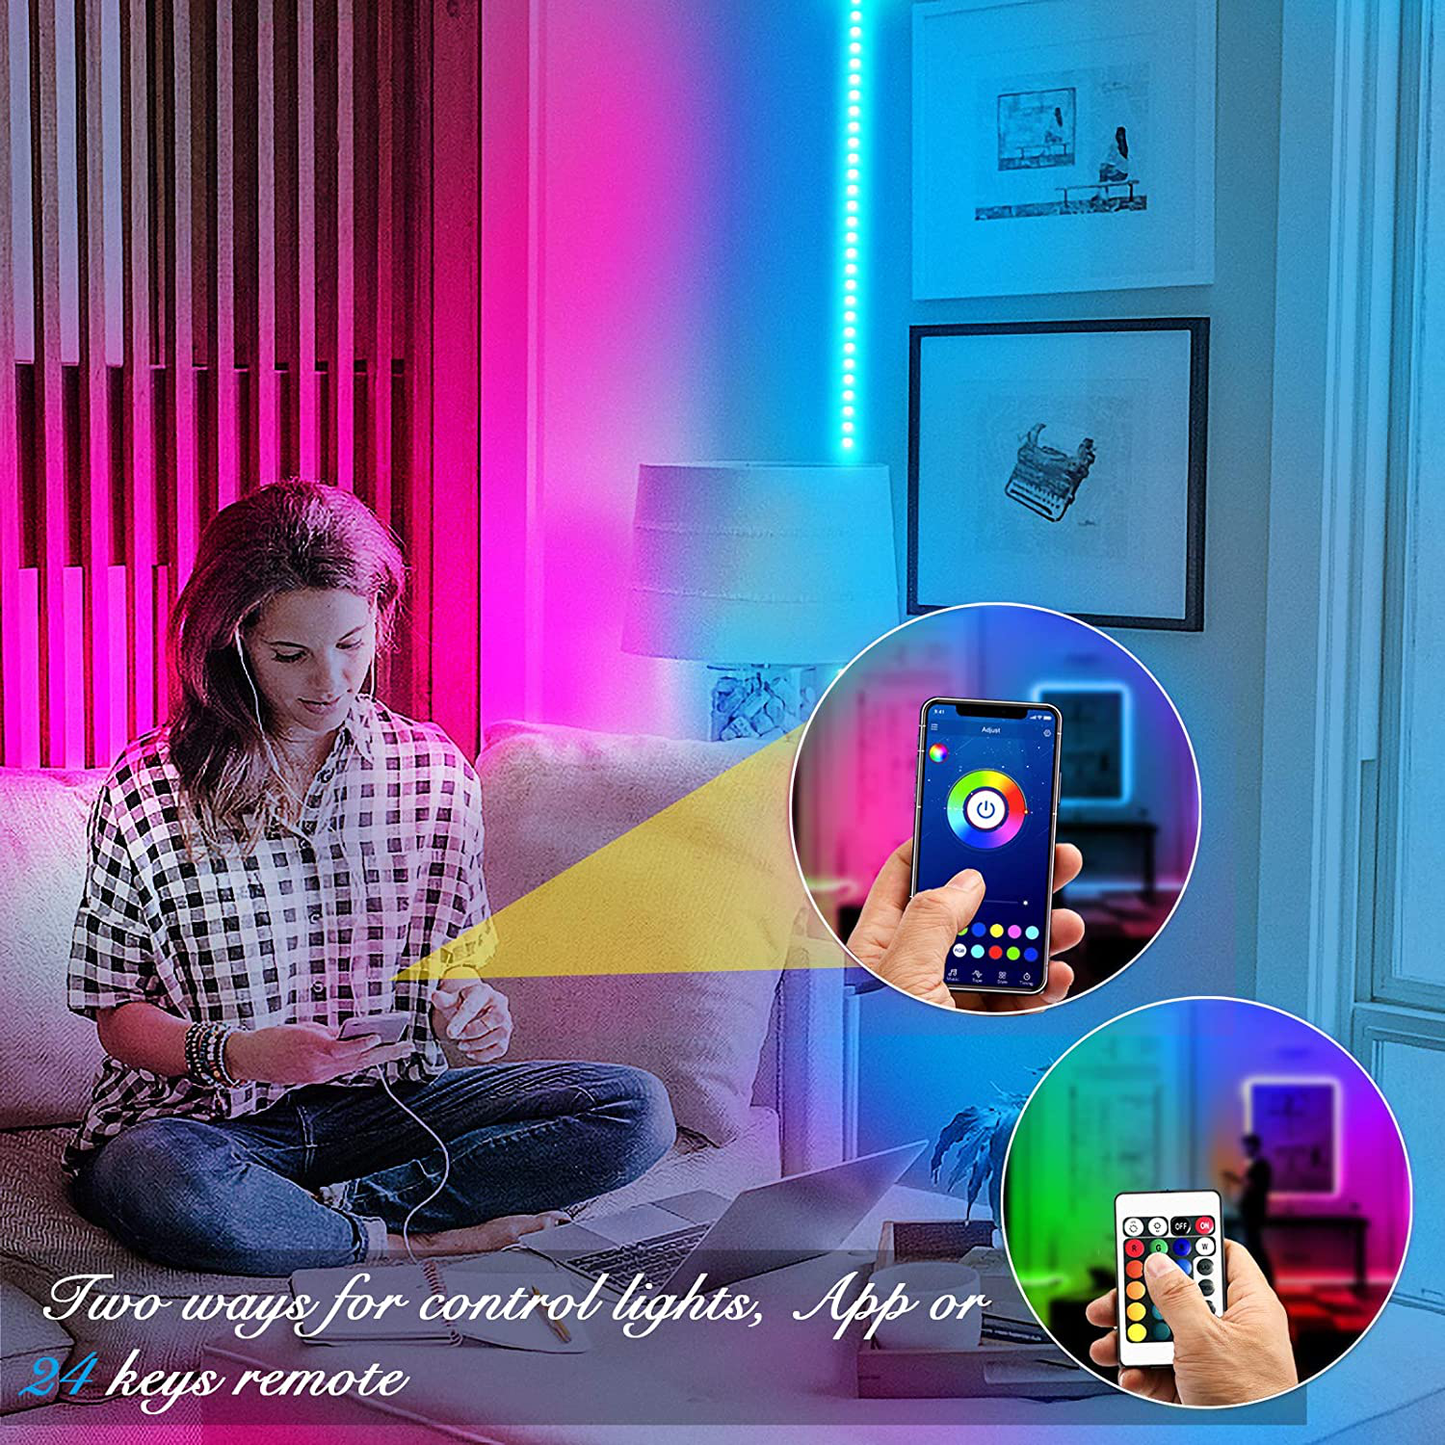 DAYBETTER Led Strip Lights Smart Light Strips with App Control Remote, 5050 RGB Led Lights for Bedroom, Music Sync Color Changing Lights for Room Party